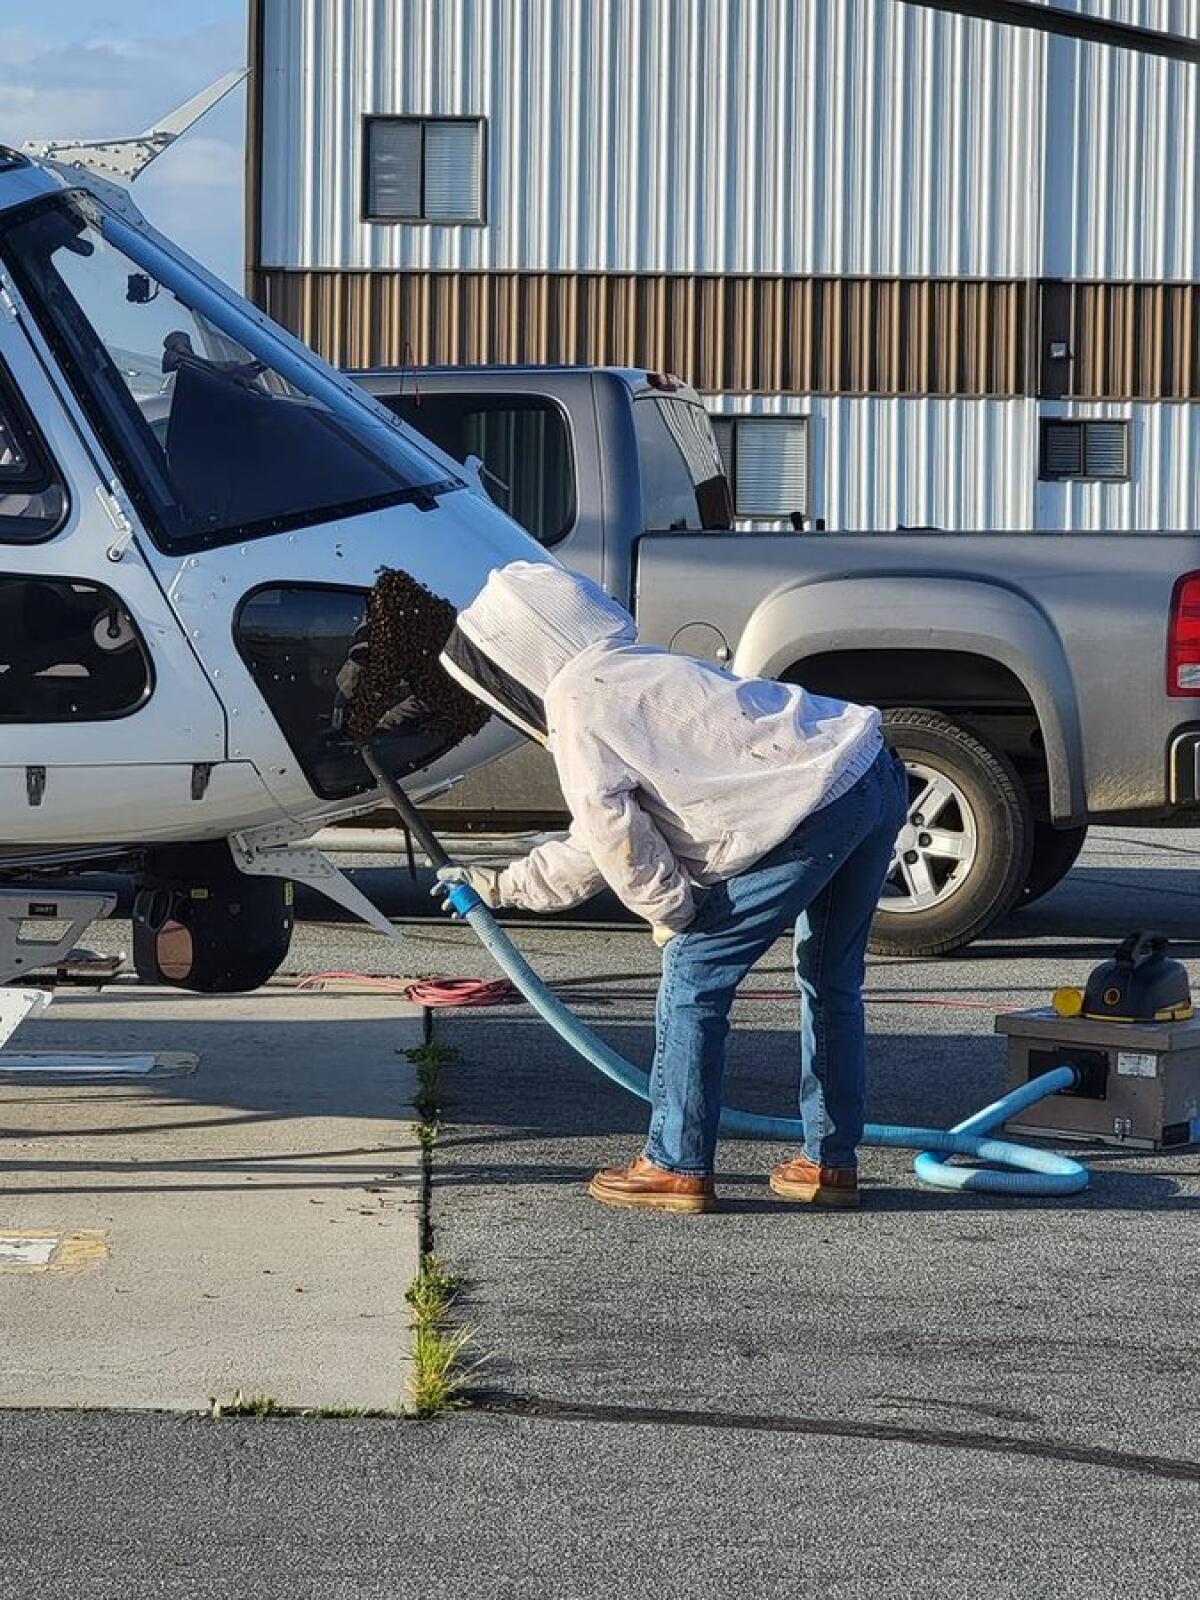 Bee removal expert Suzi Hulsmann uses a vacuum to gently suck a swarm of bees from a CHP helicopter on March 7.